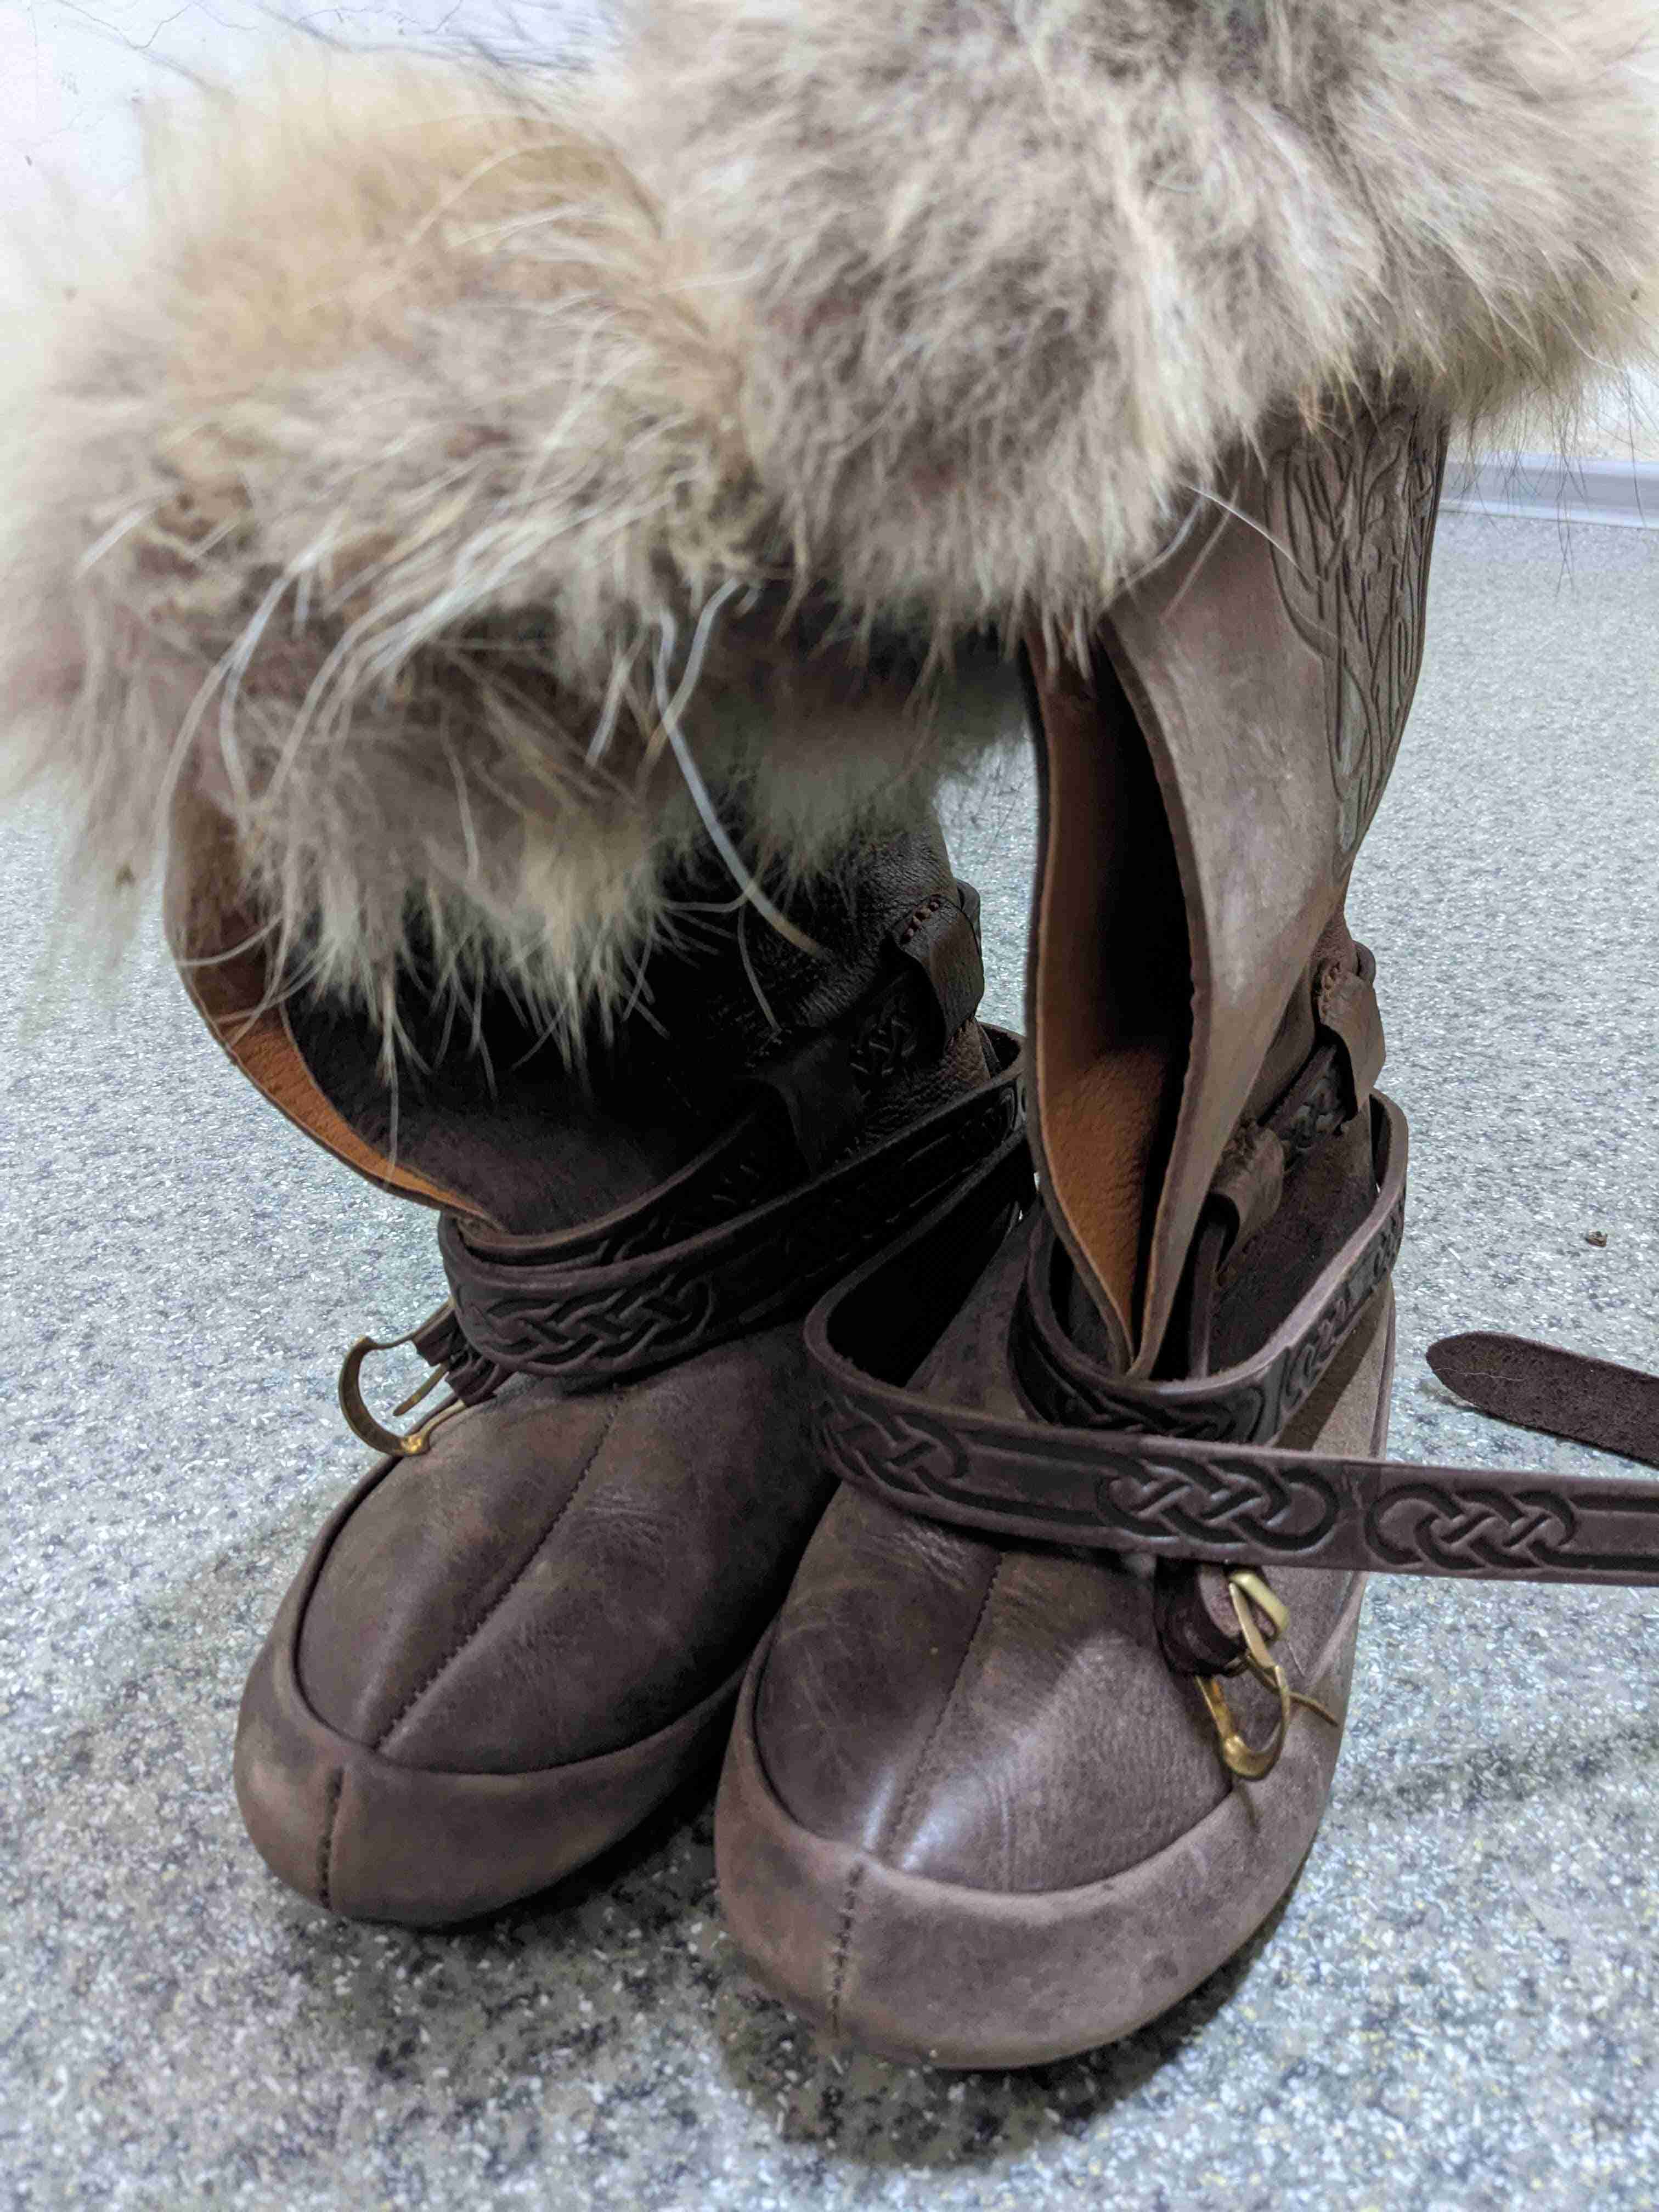 Sale Knut the Merry Boots with the Fur